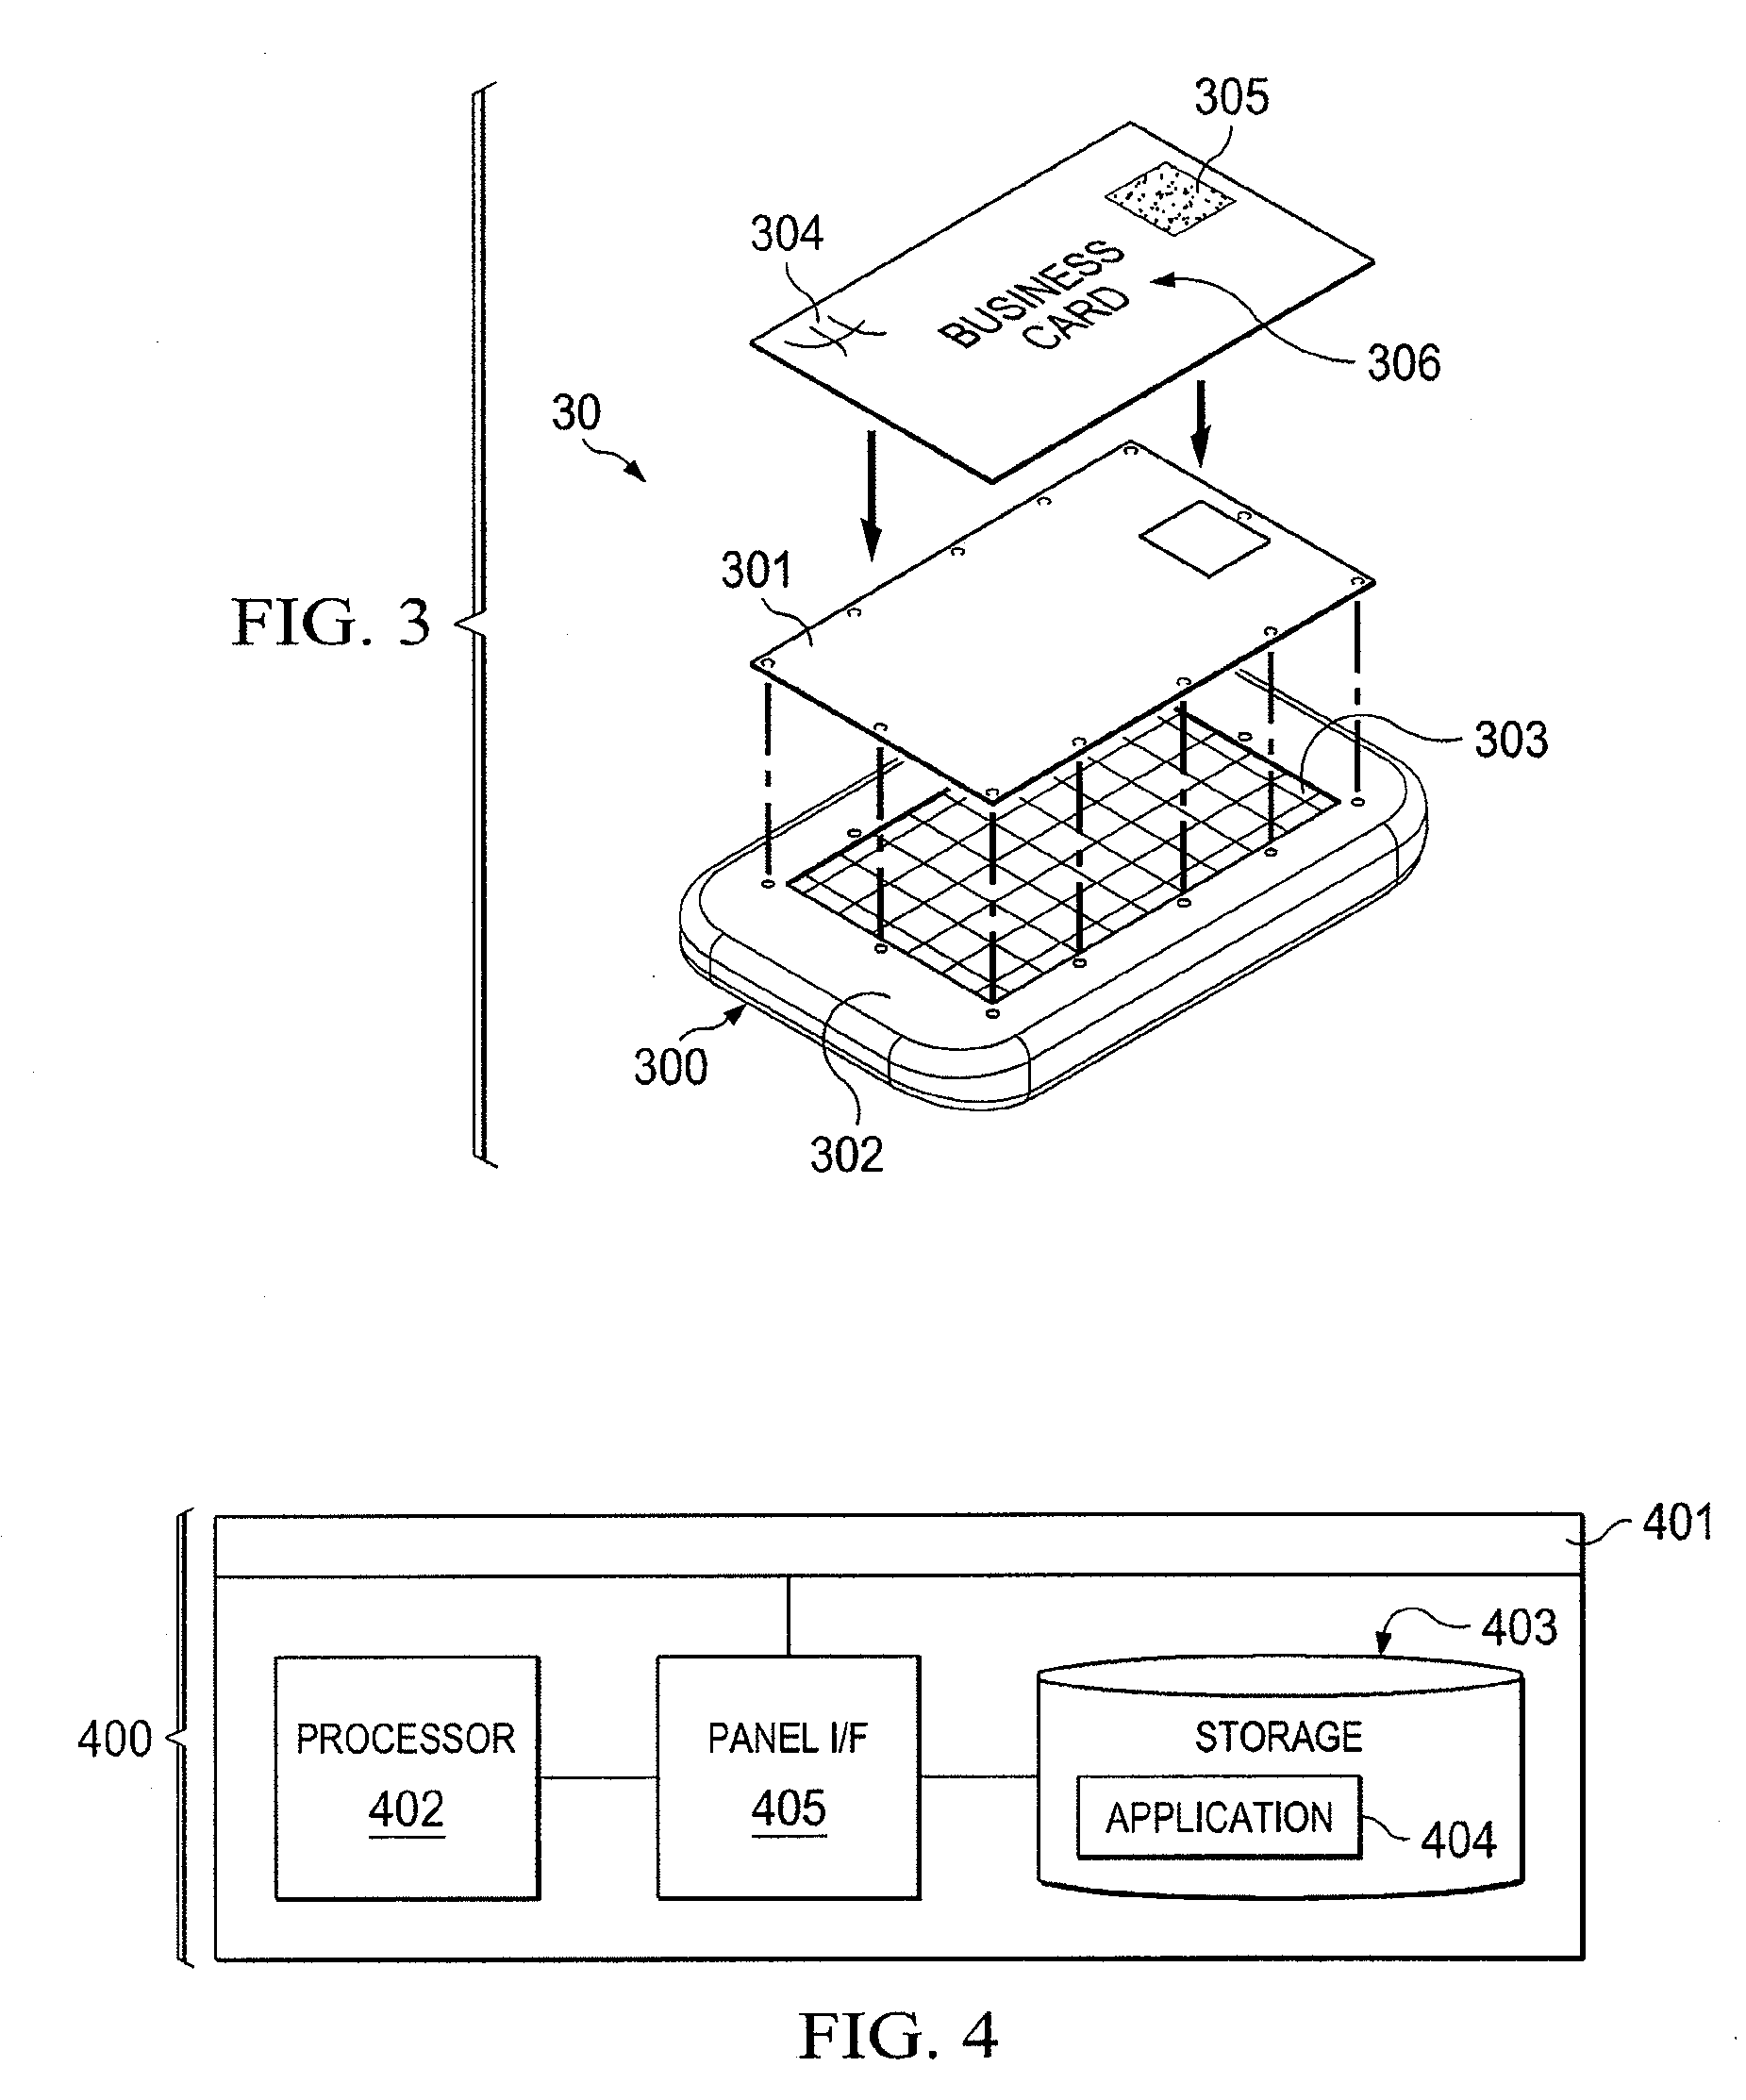 Surface scanning with a capacitive touch screen